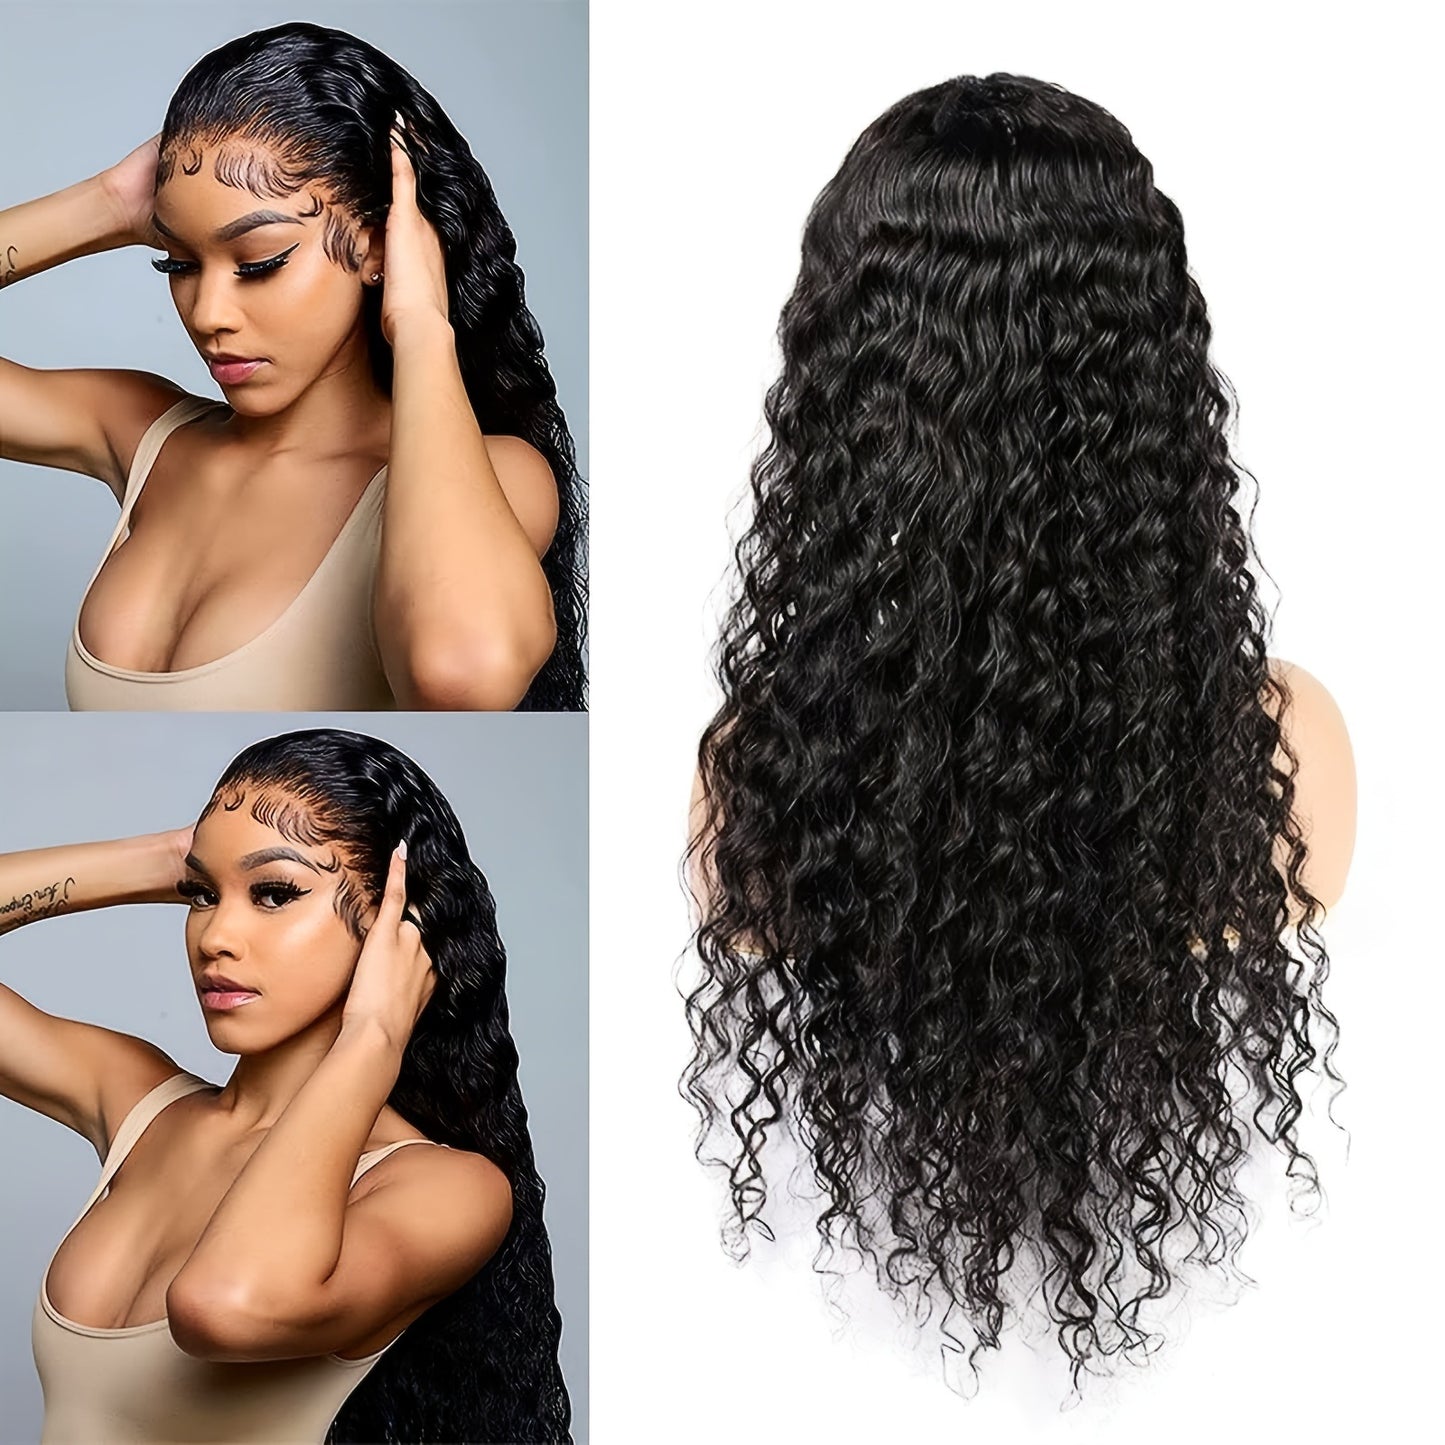 Deep Wave Transparent Lace Front Wigs Wet Wavy Human Hair 13x4 Lace Frontal Wigs Deep Curly Wave Wig For Women With Baby Hair Pre Plucked 100% Unprocessed Brazilian Virgin Hair Natural Black